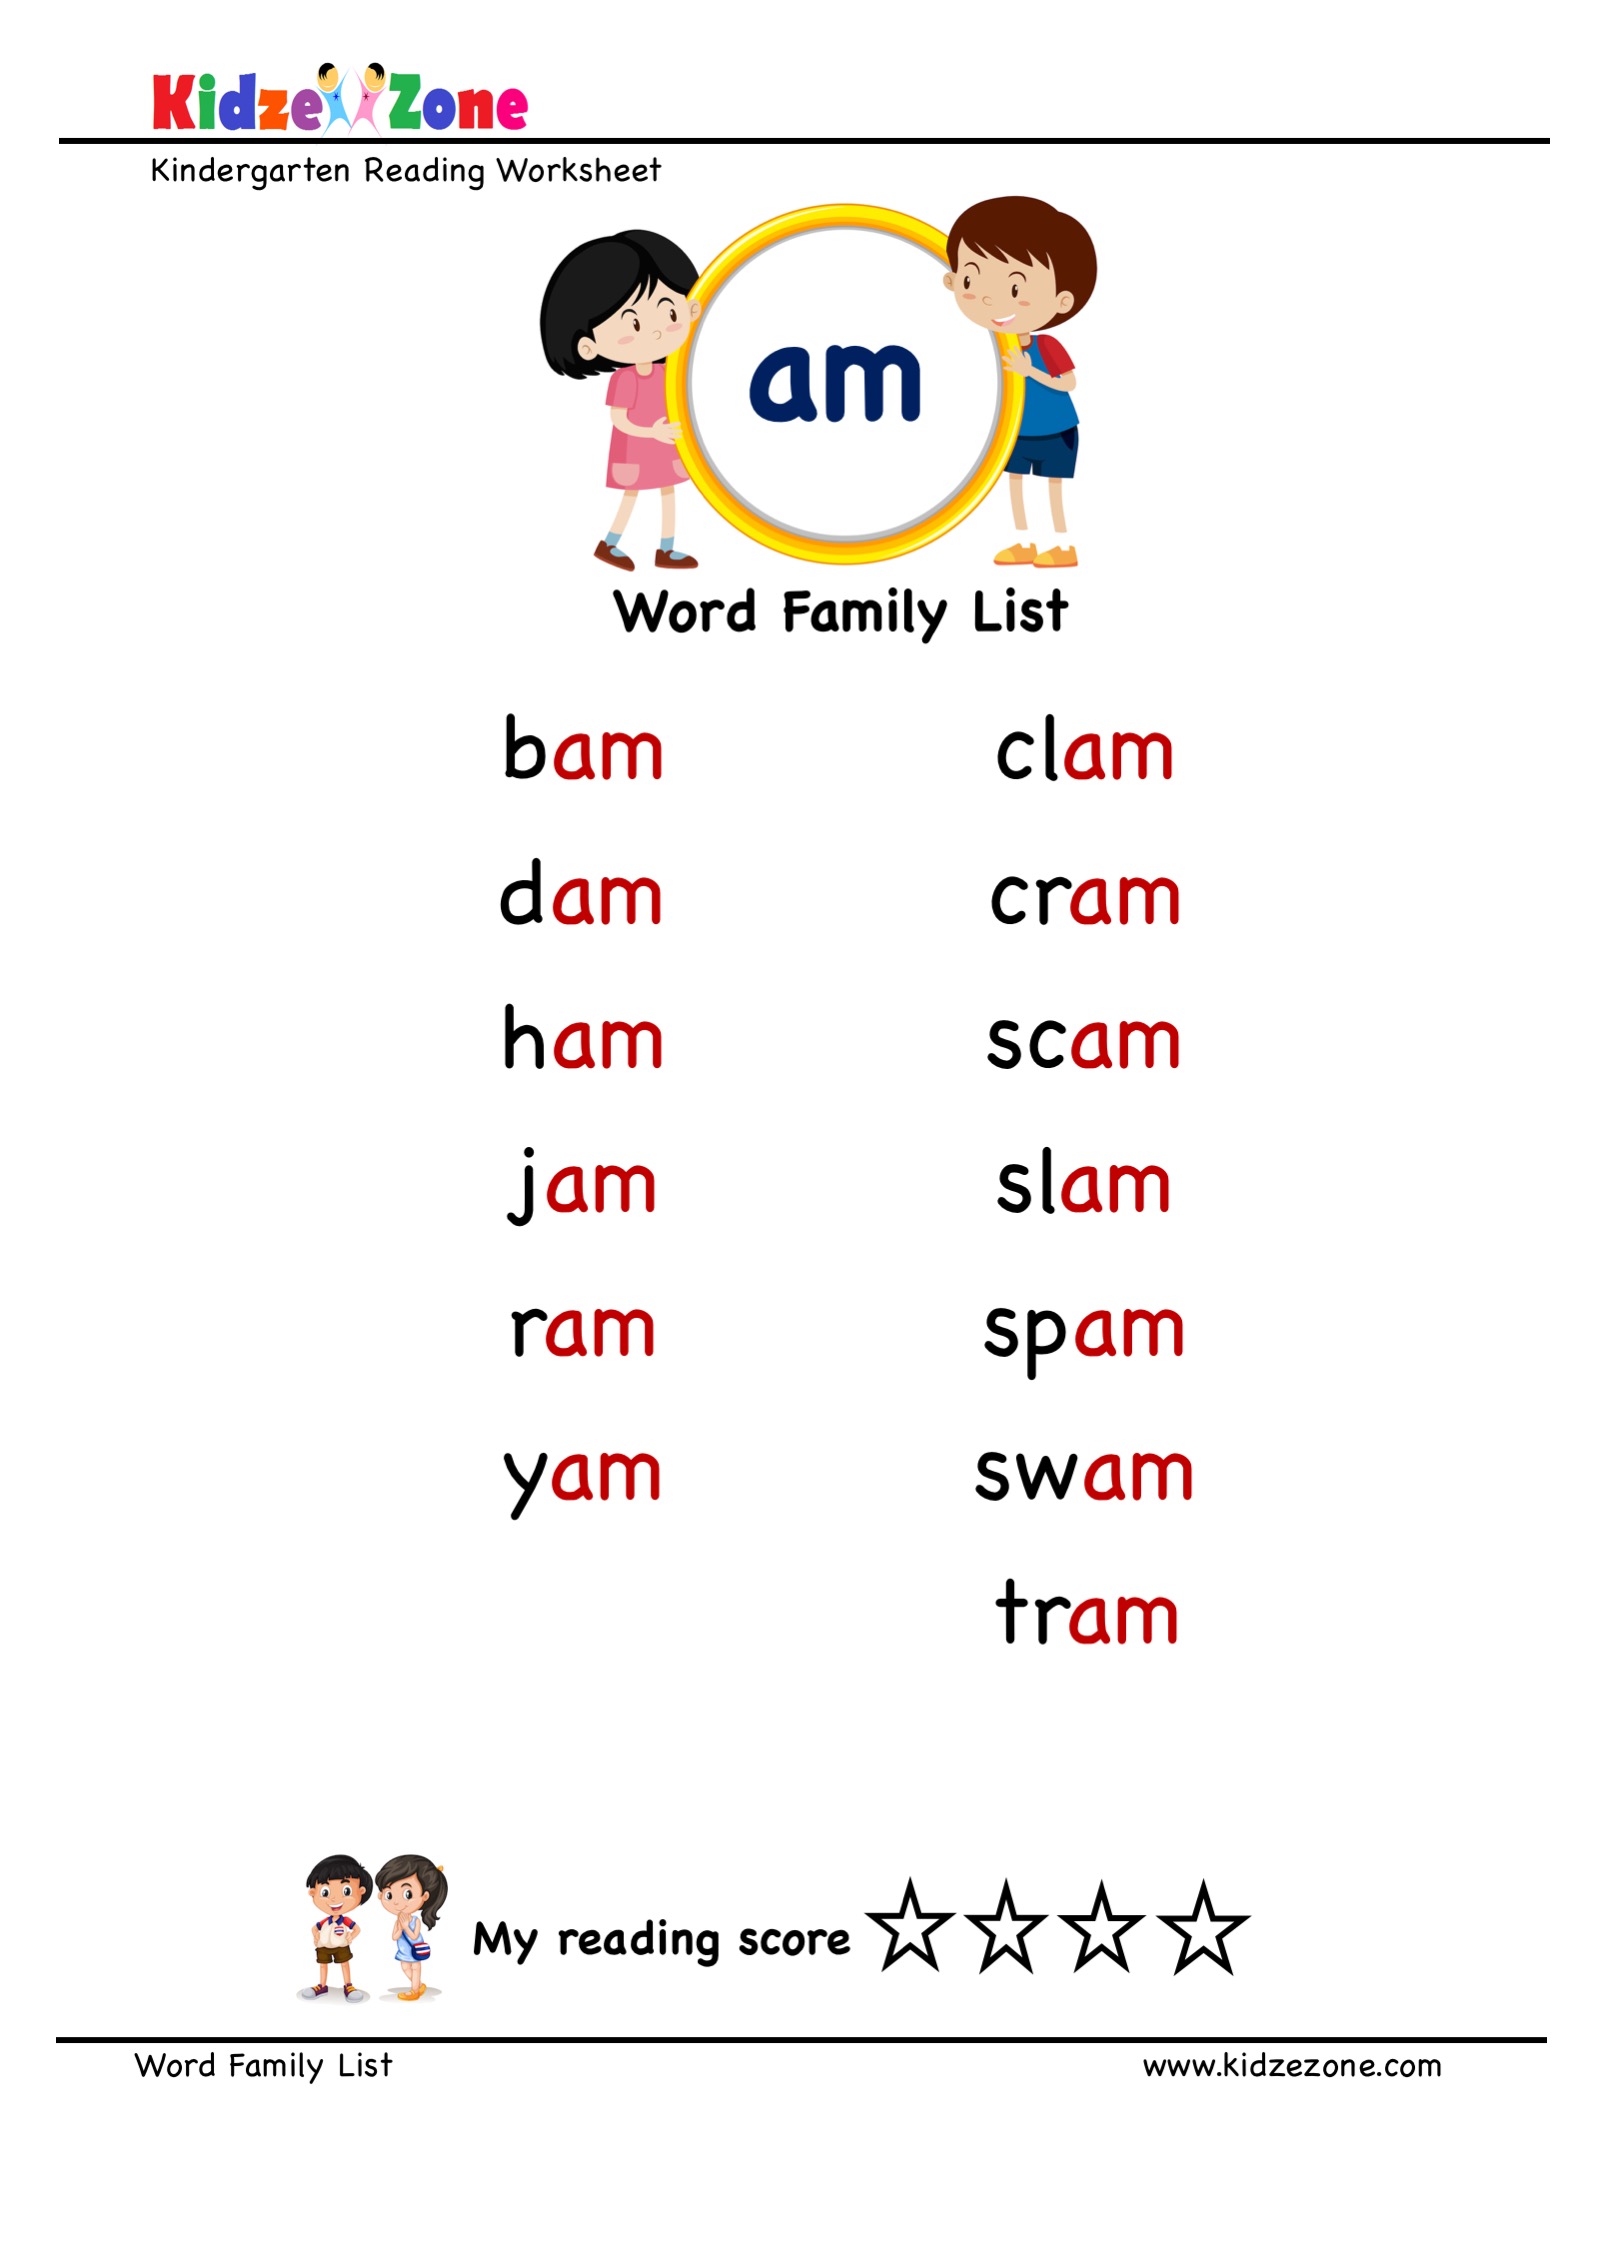 Explore and learn words from "am" word family with word list worksheet